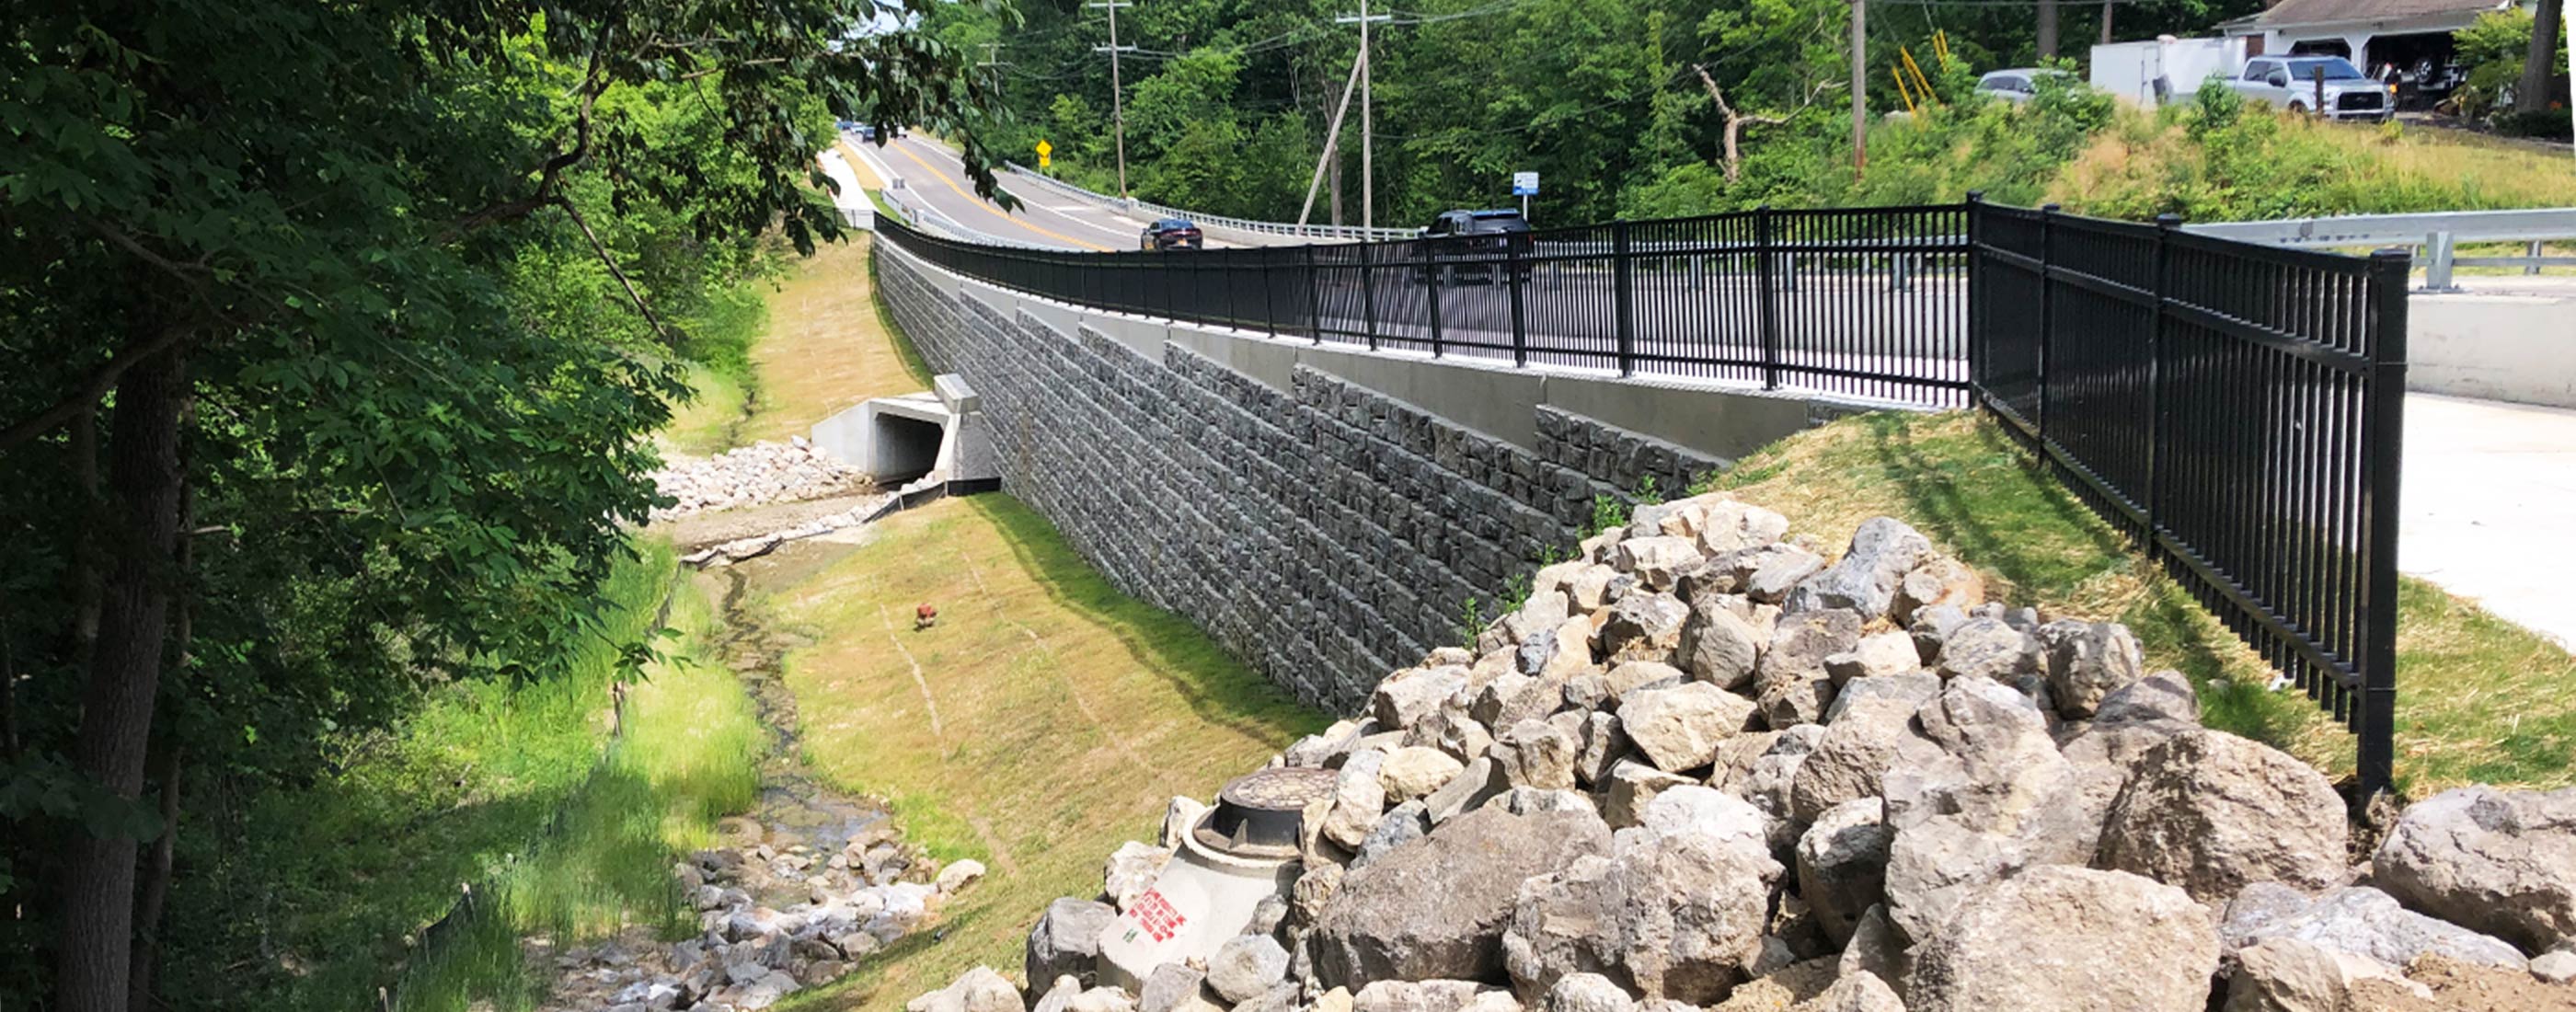 View of the culvert and retaining wall